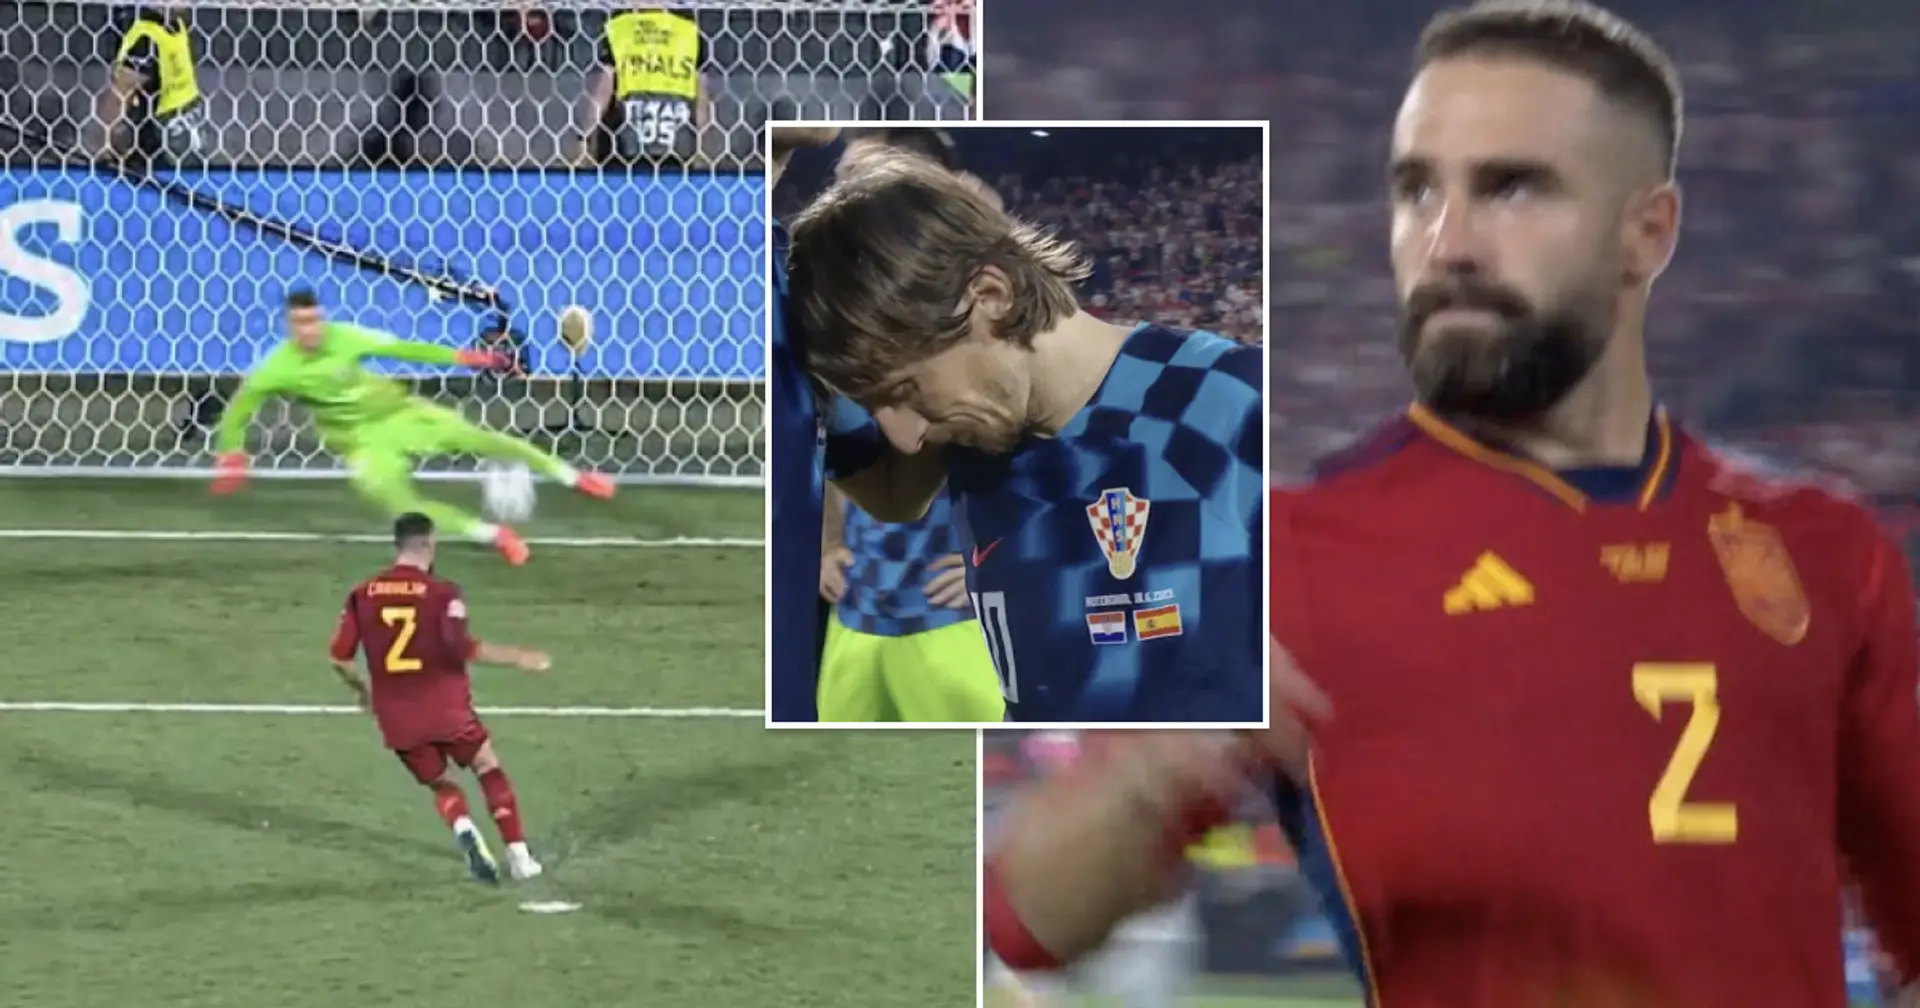 Carvajal ends Modric's international trophy dream with ice-cold panenka penalty for Spain